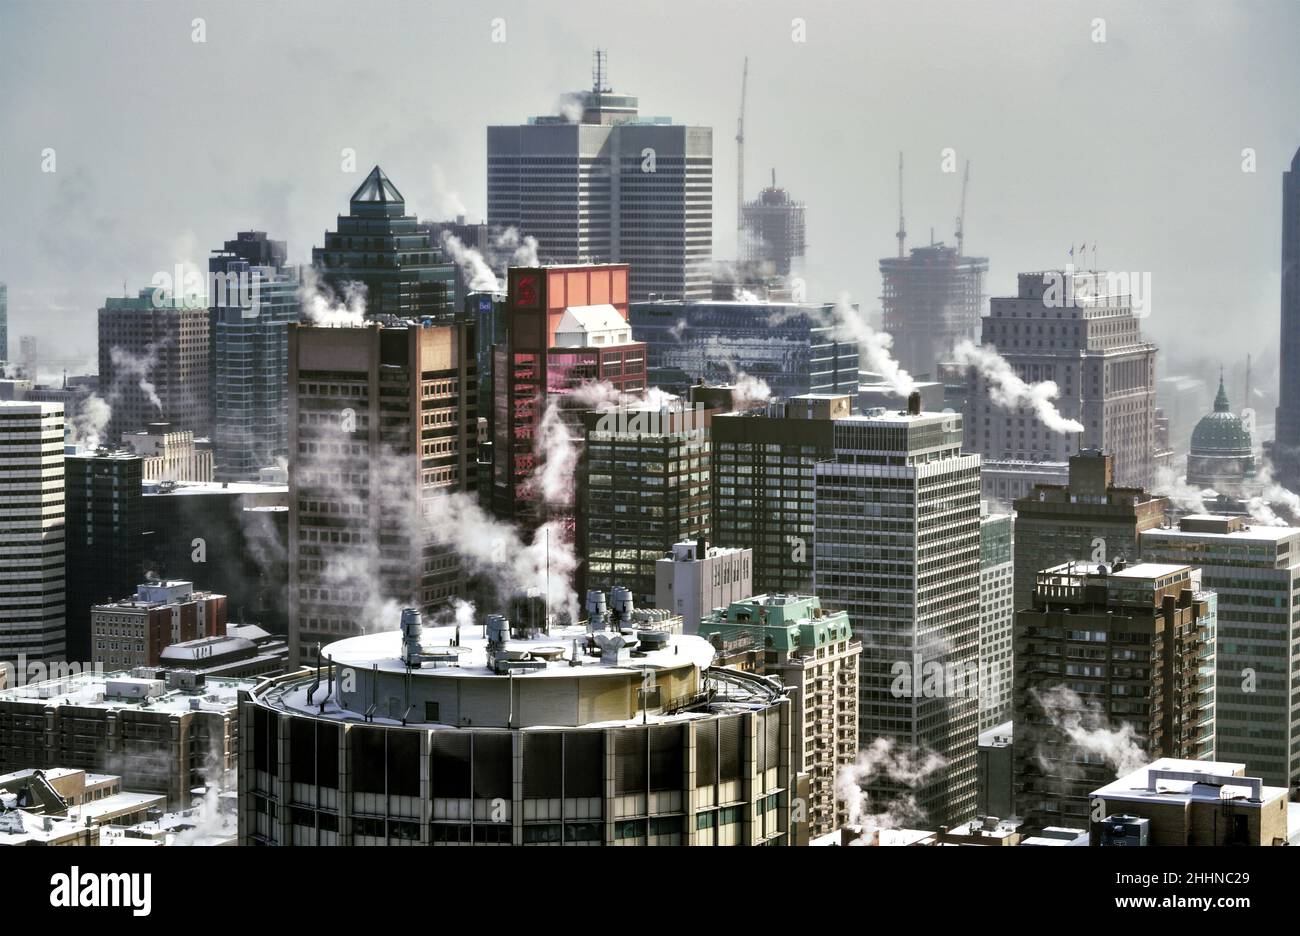 City of Montreal,Quebec during a winter cold wave. Stock Photo